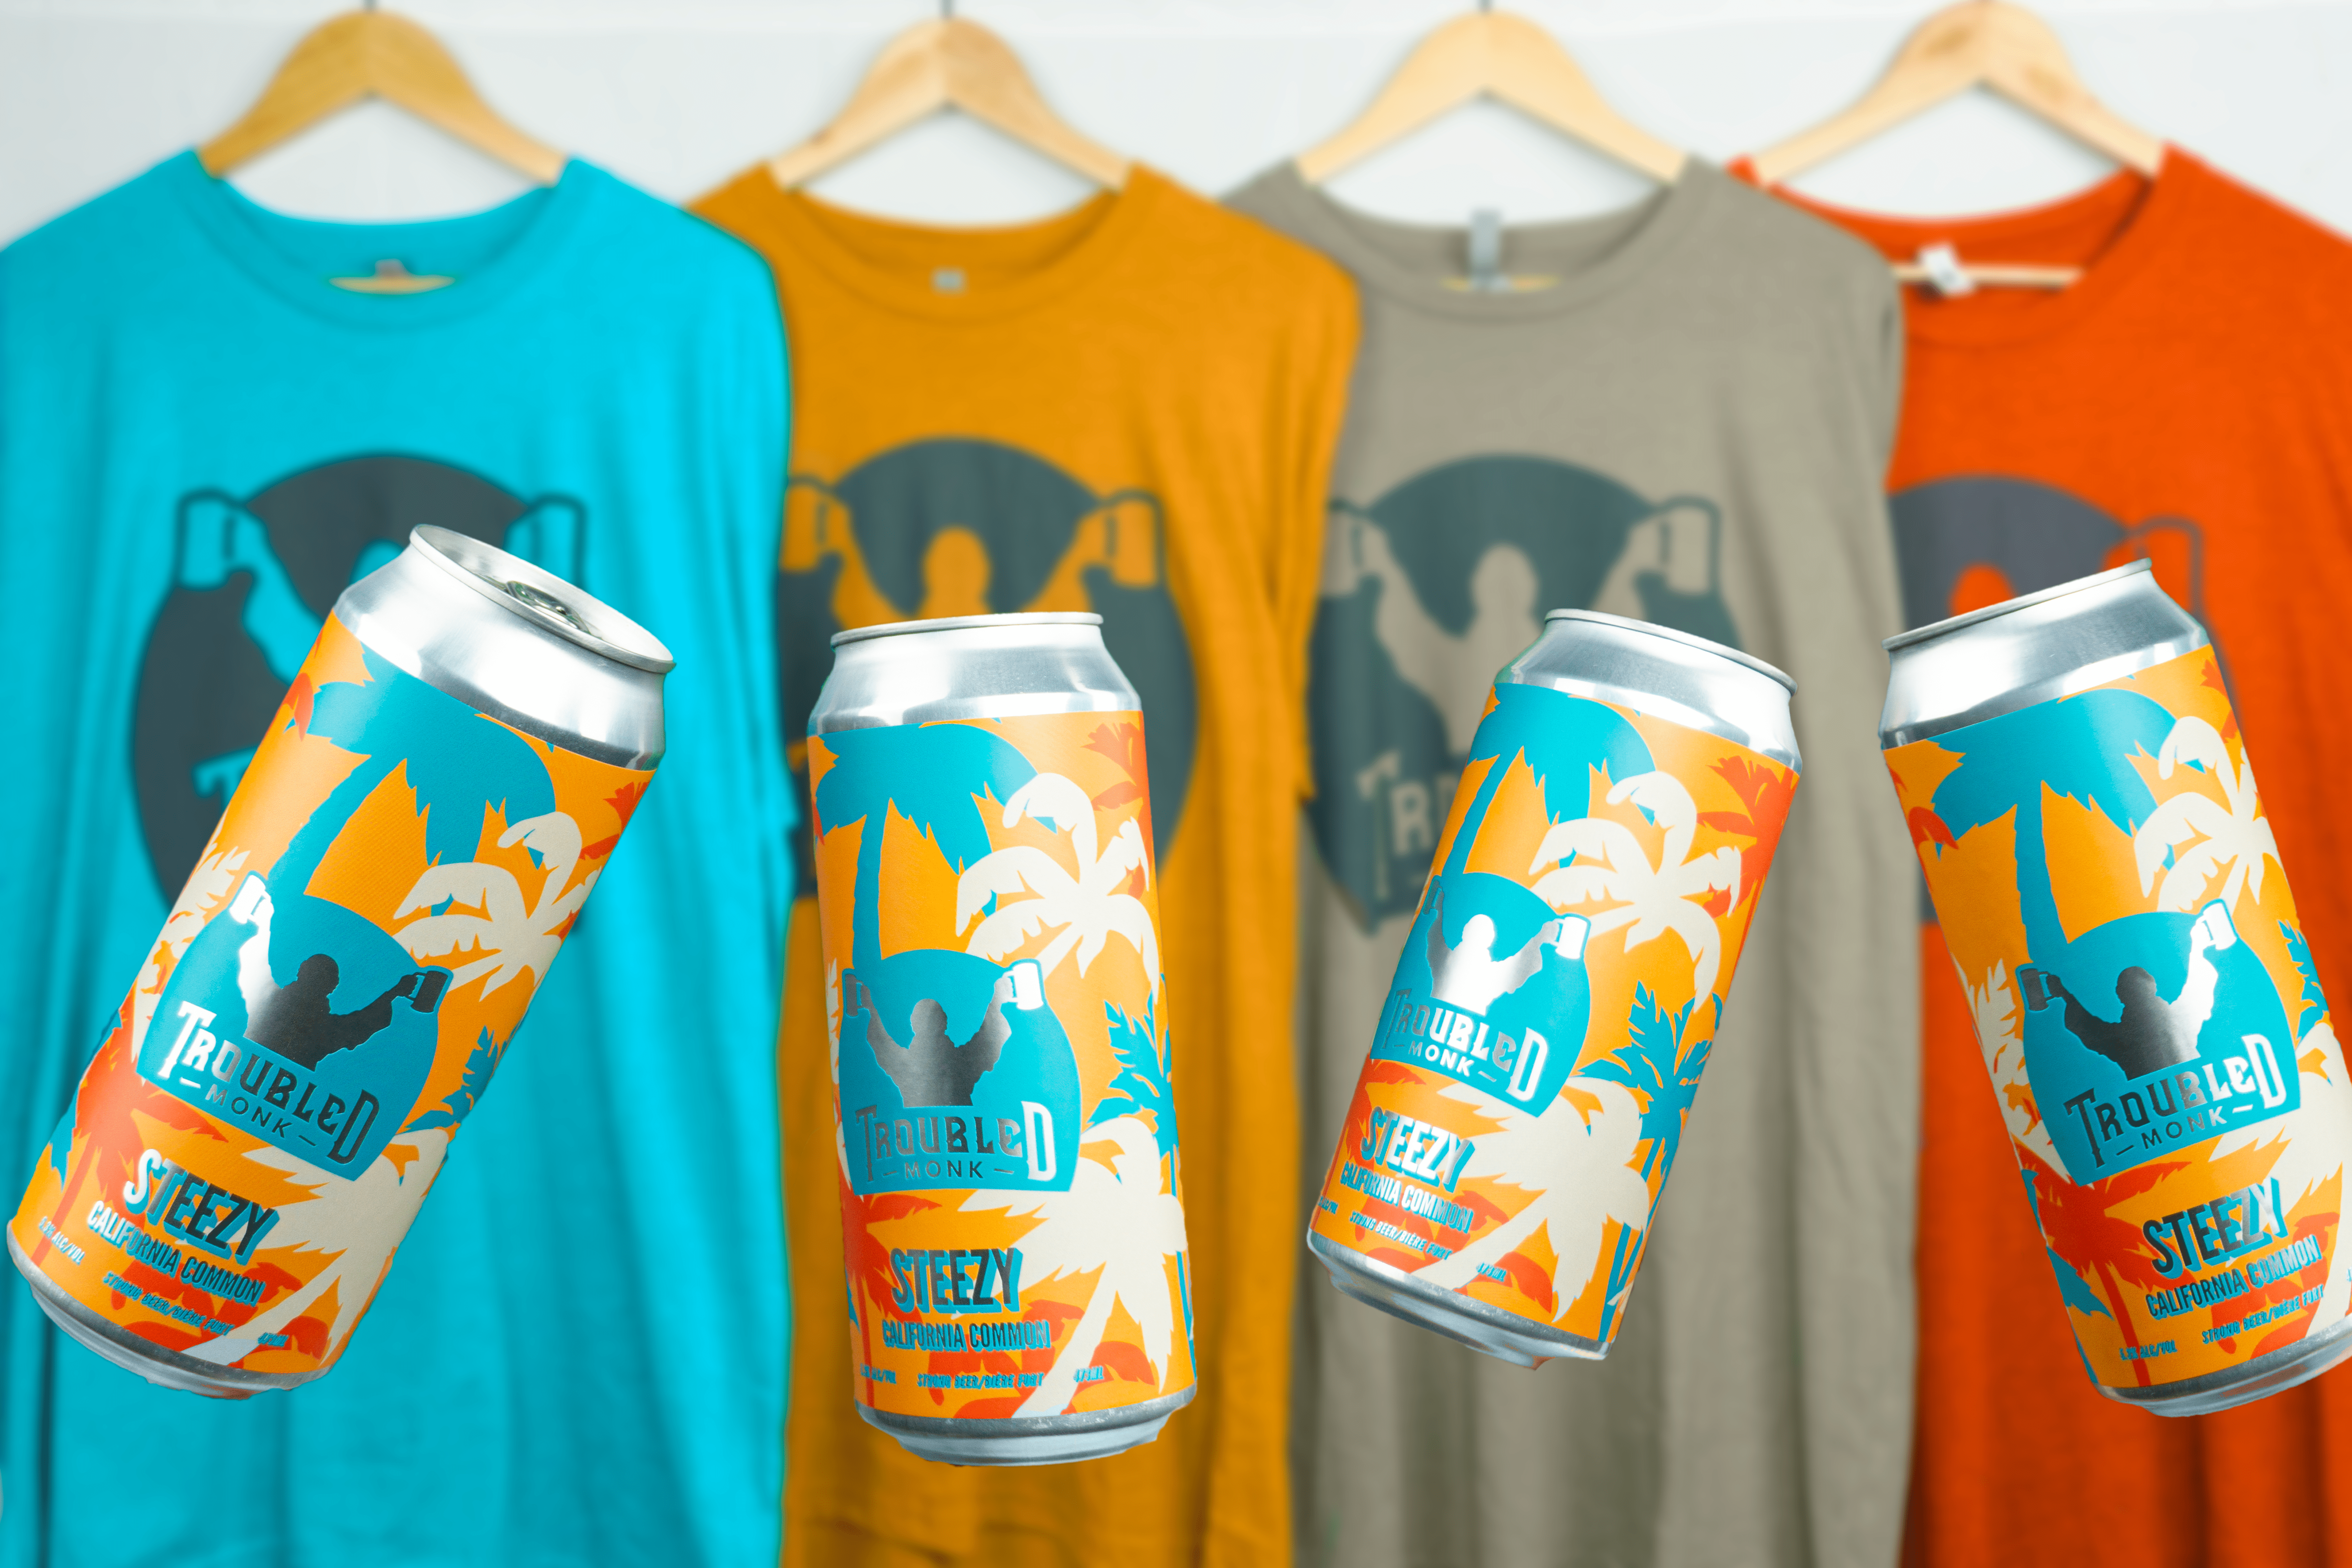 Steezy cans next to Troubled Monk shirts in turquoise, pumpkin orange, brown, and bright orange